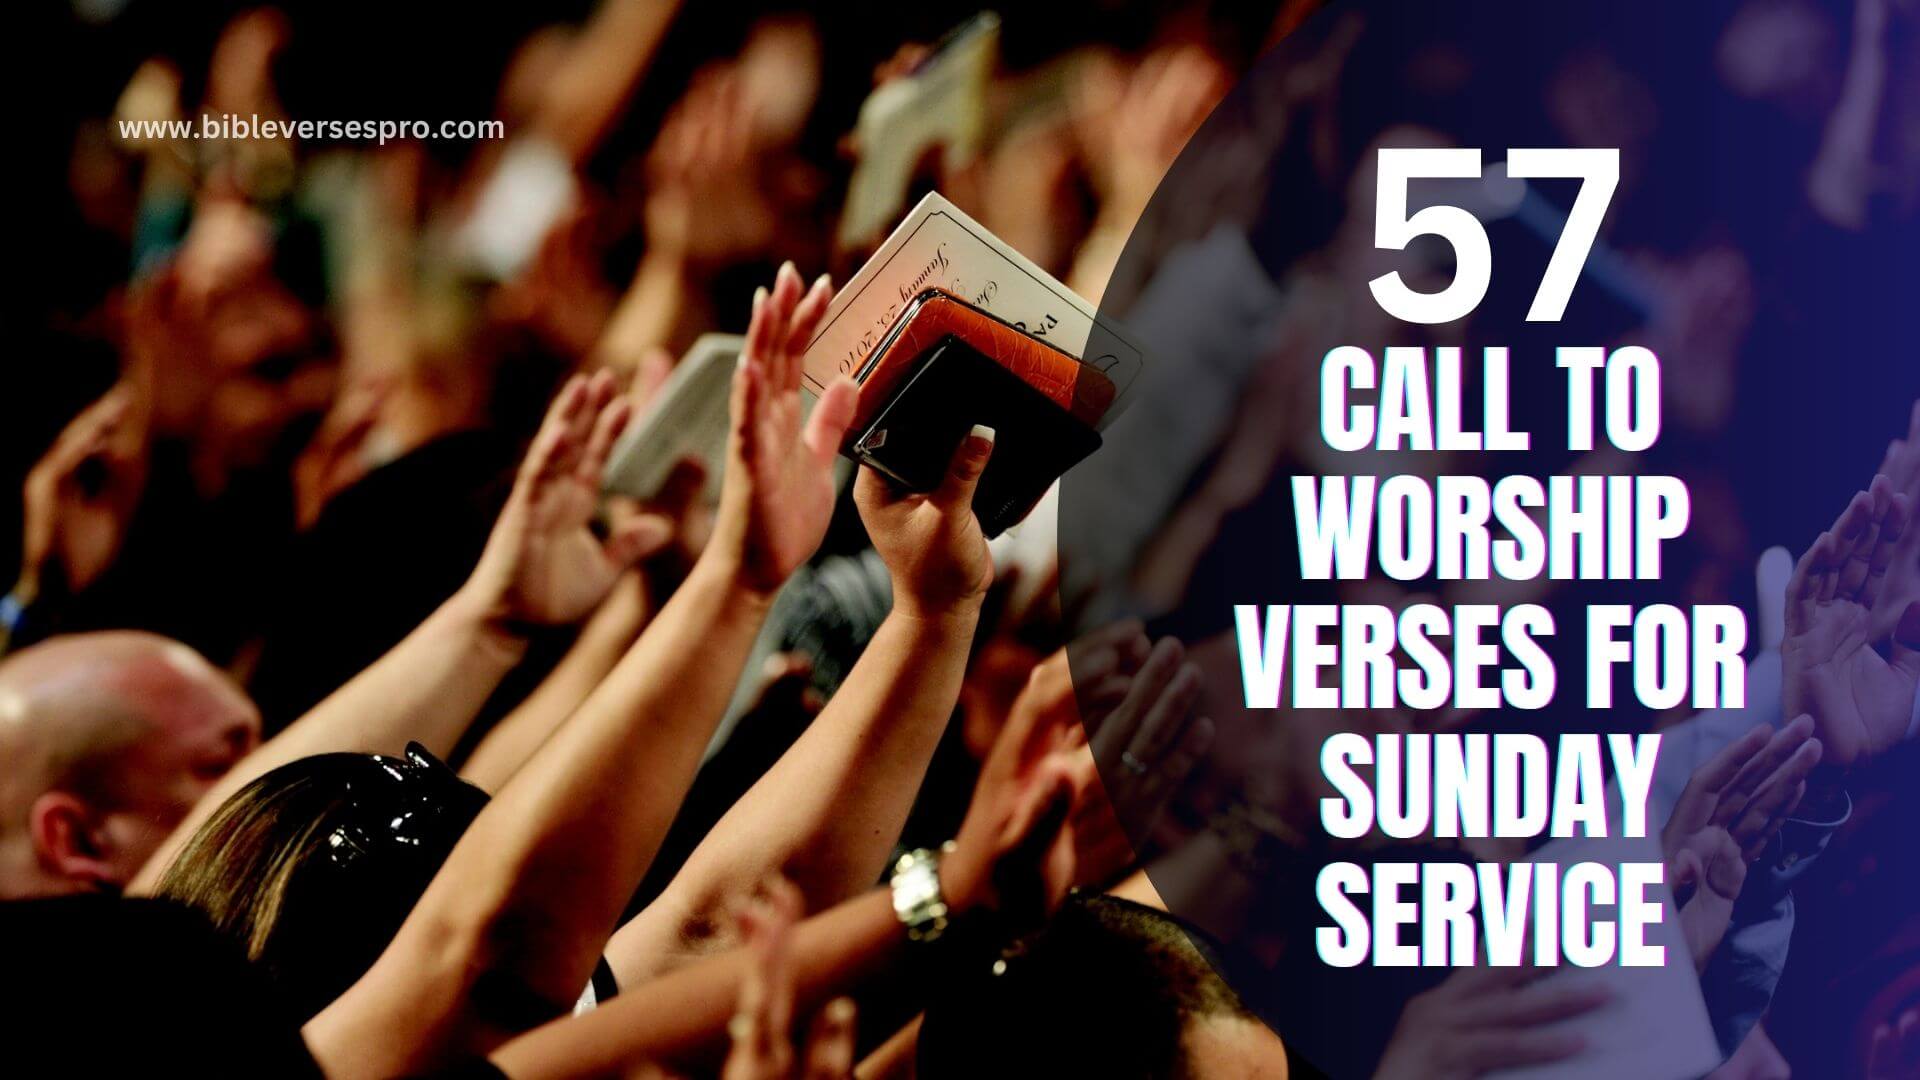 Call To Worship Verses For Sunday Service (1)